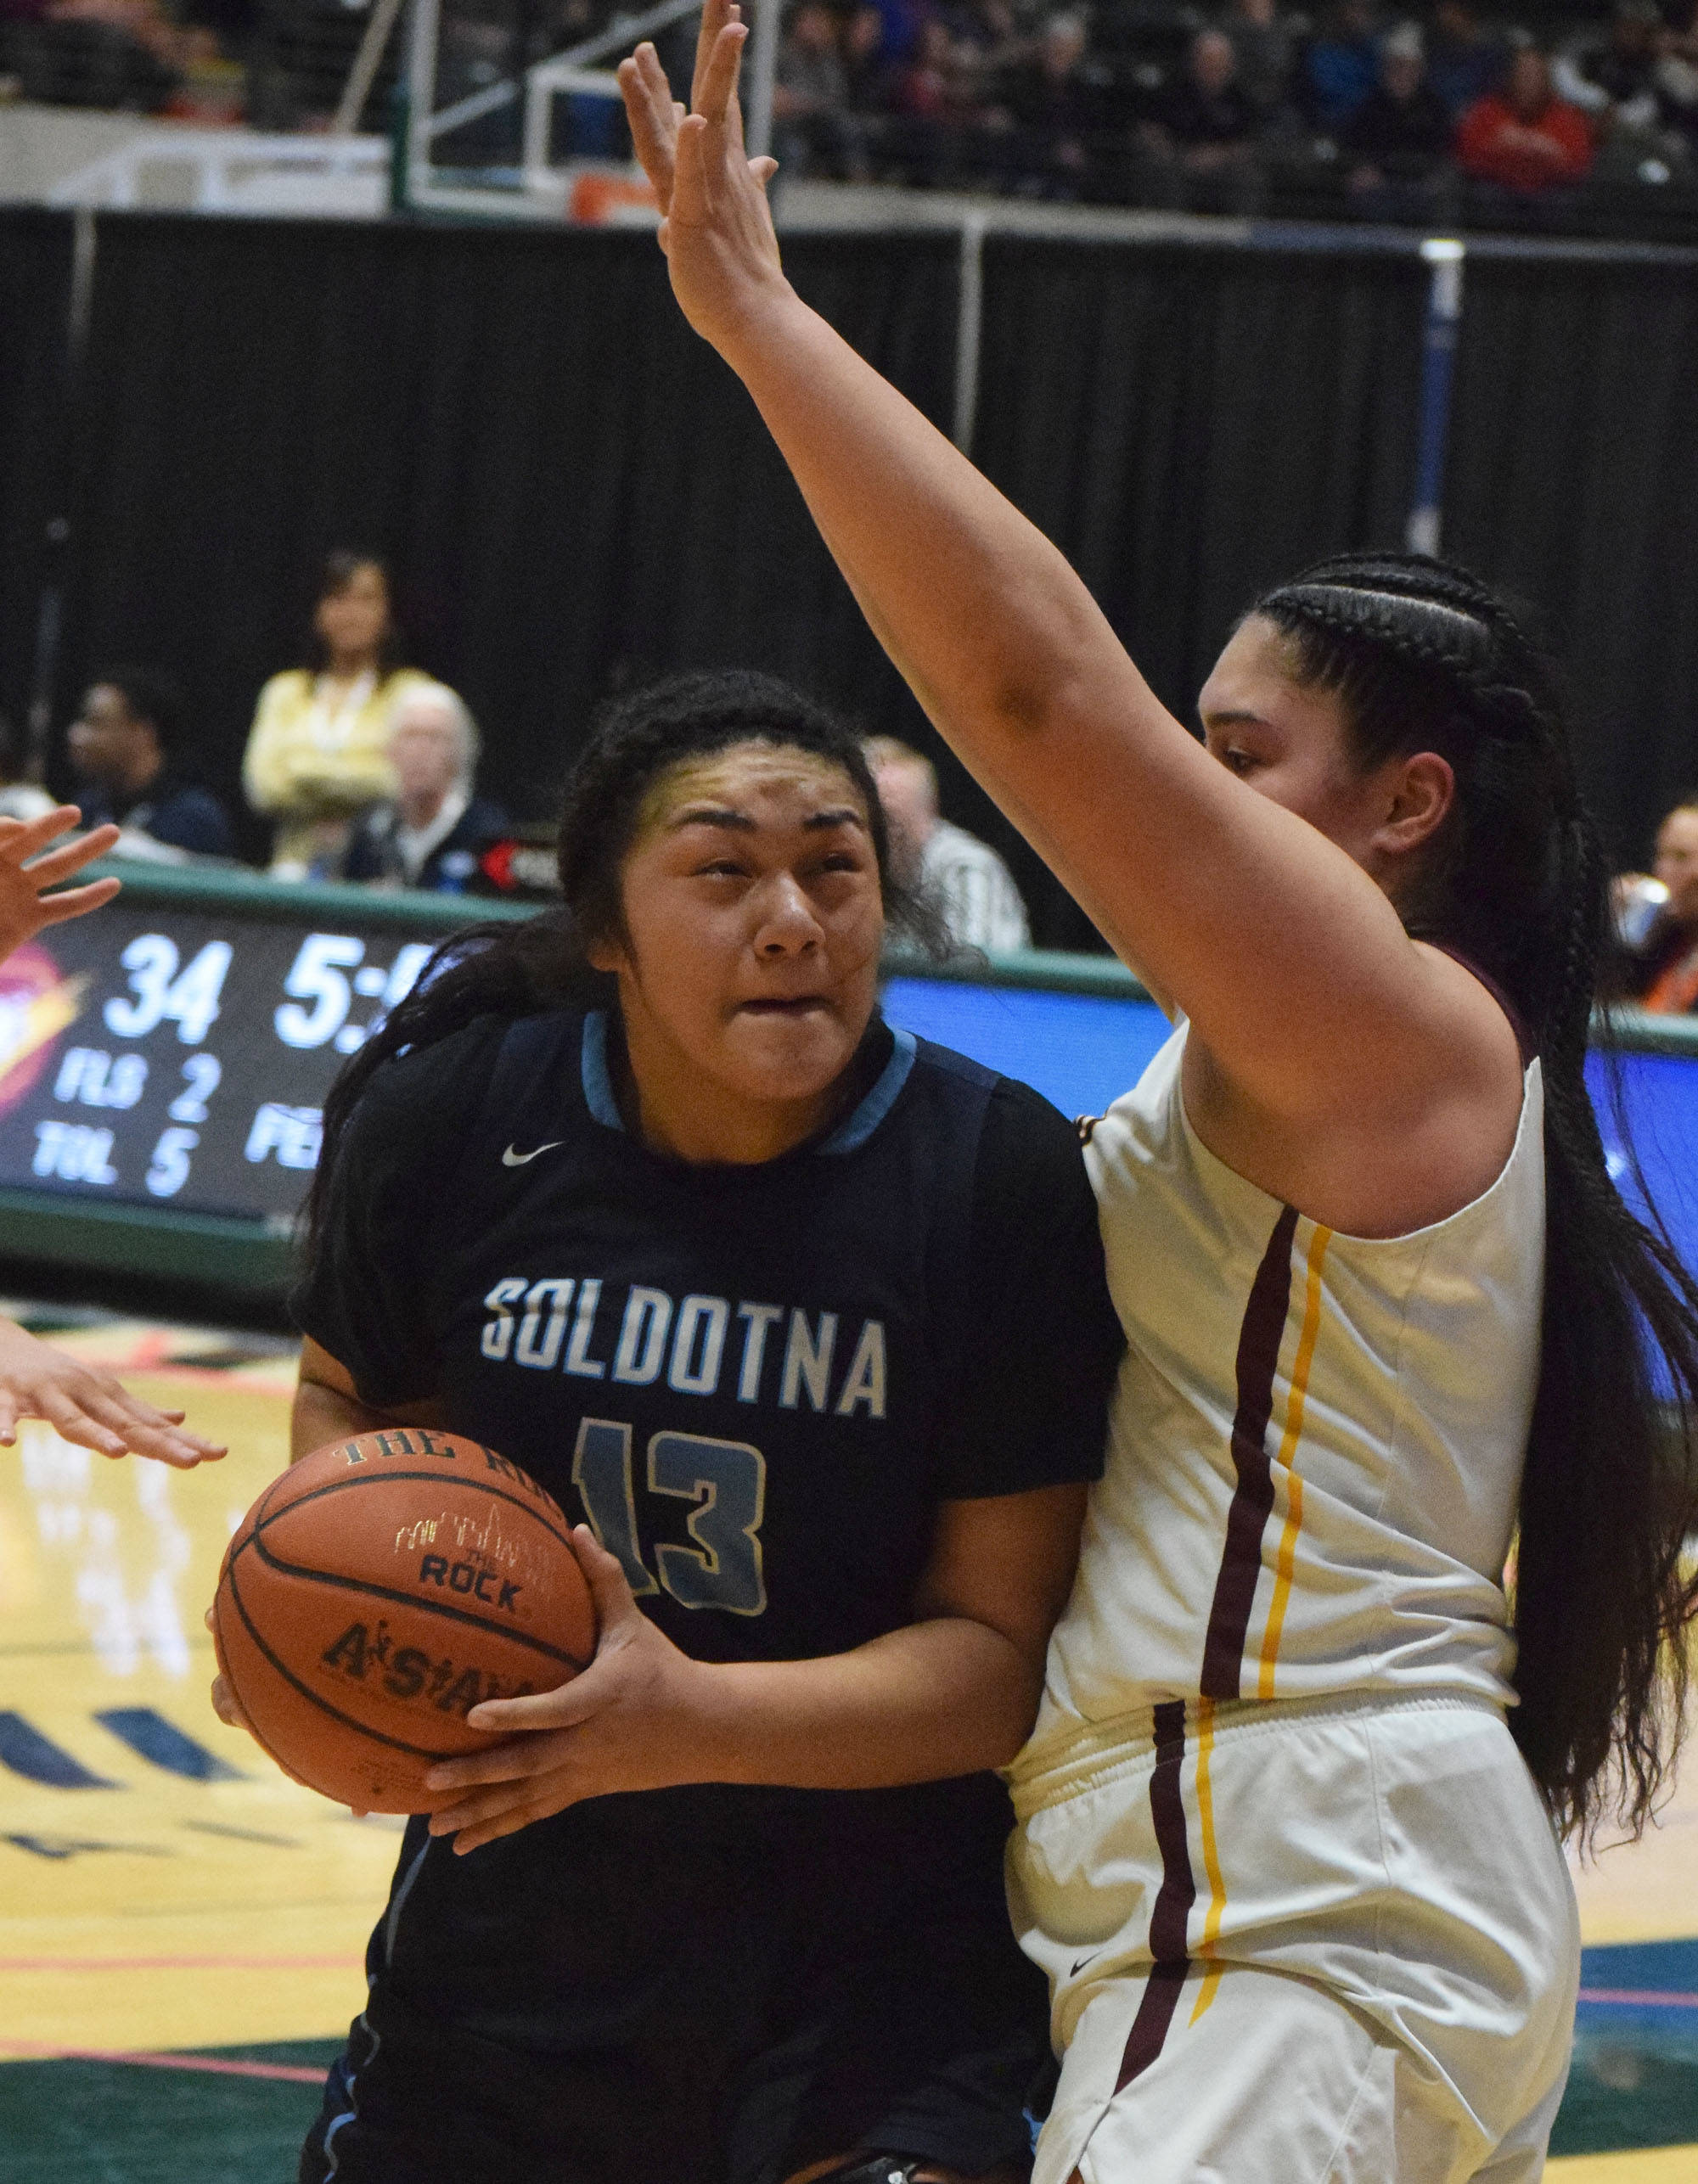 Soldotna Ituau Tuisaula (left) drives the lane by Dimond’s Alissa Pili Friday, March 22, 2019, in the Class 4A state basketball tournament at the Alaska Airlines Center in Anchorage. (Photo by Joey Klecka/Peninsula Clarion)